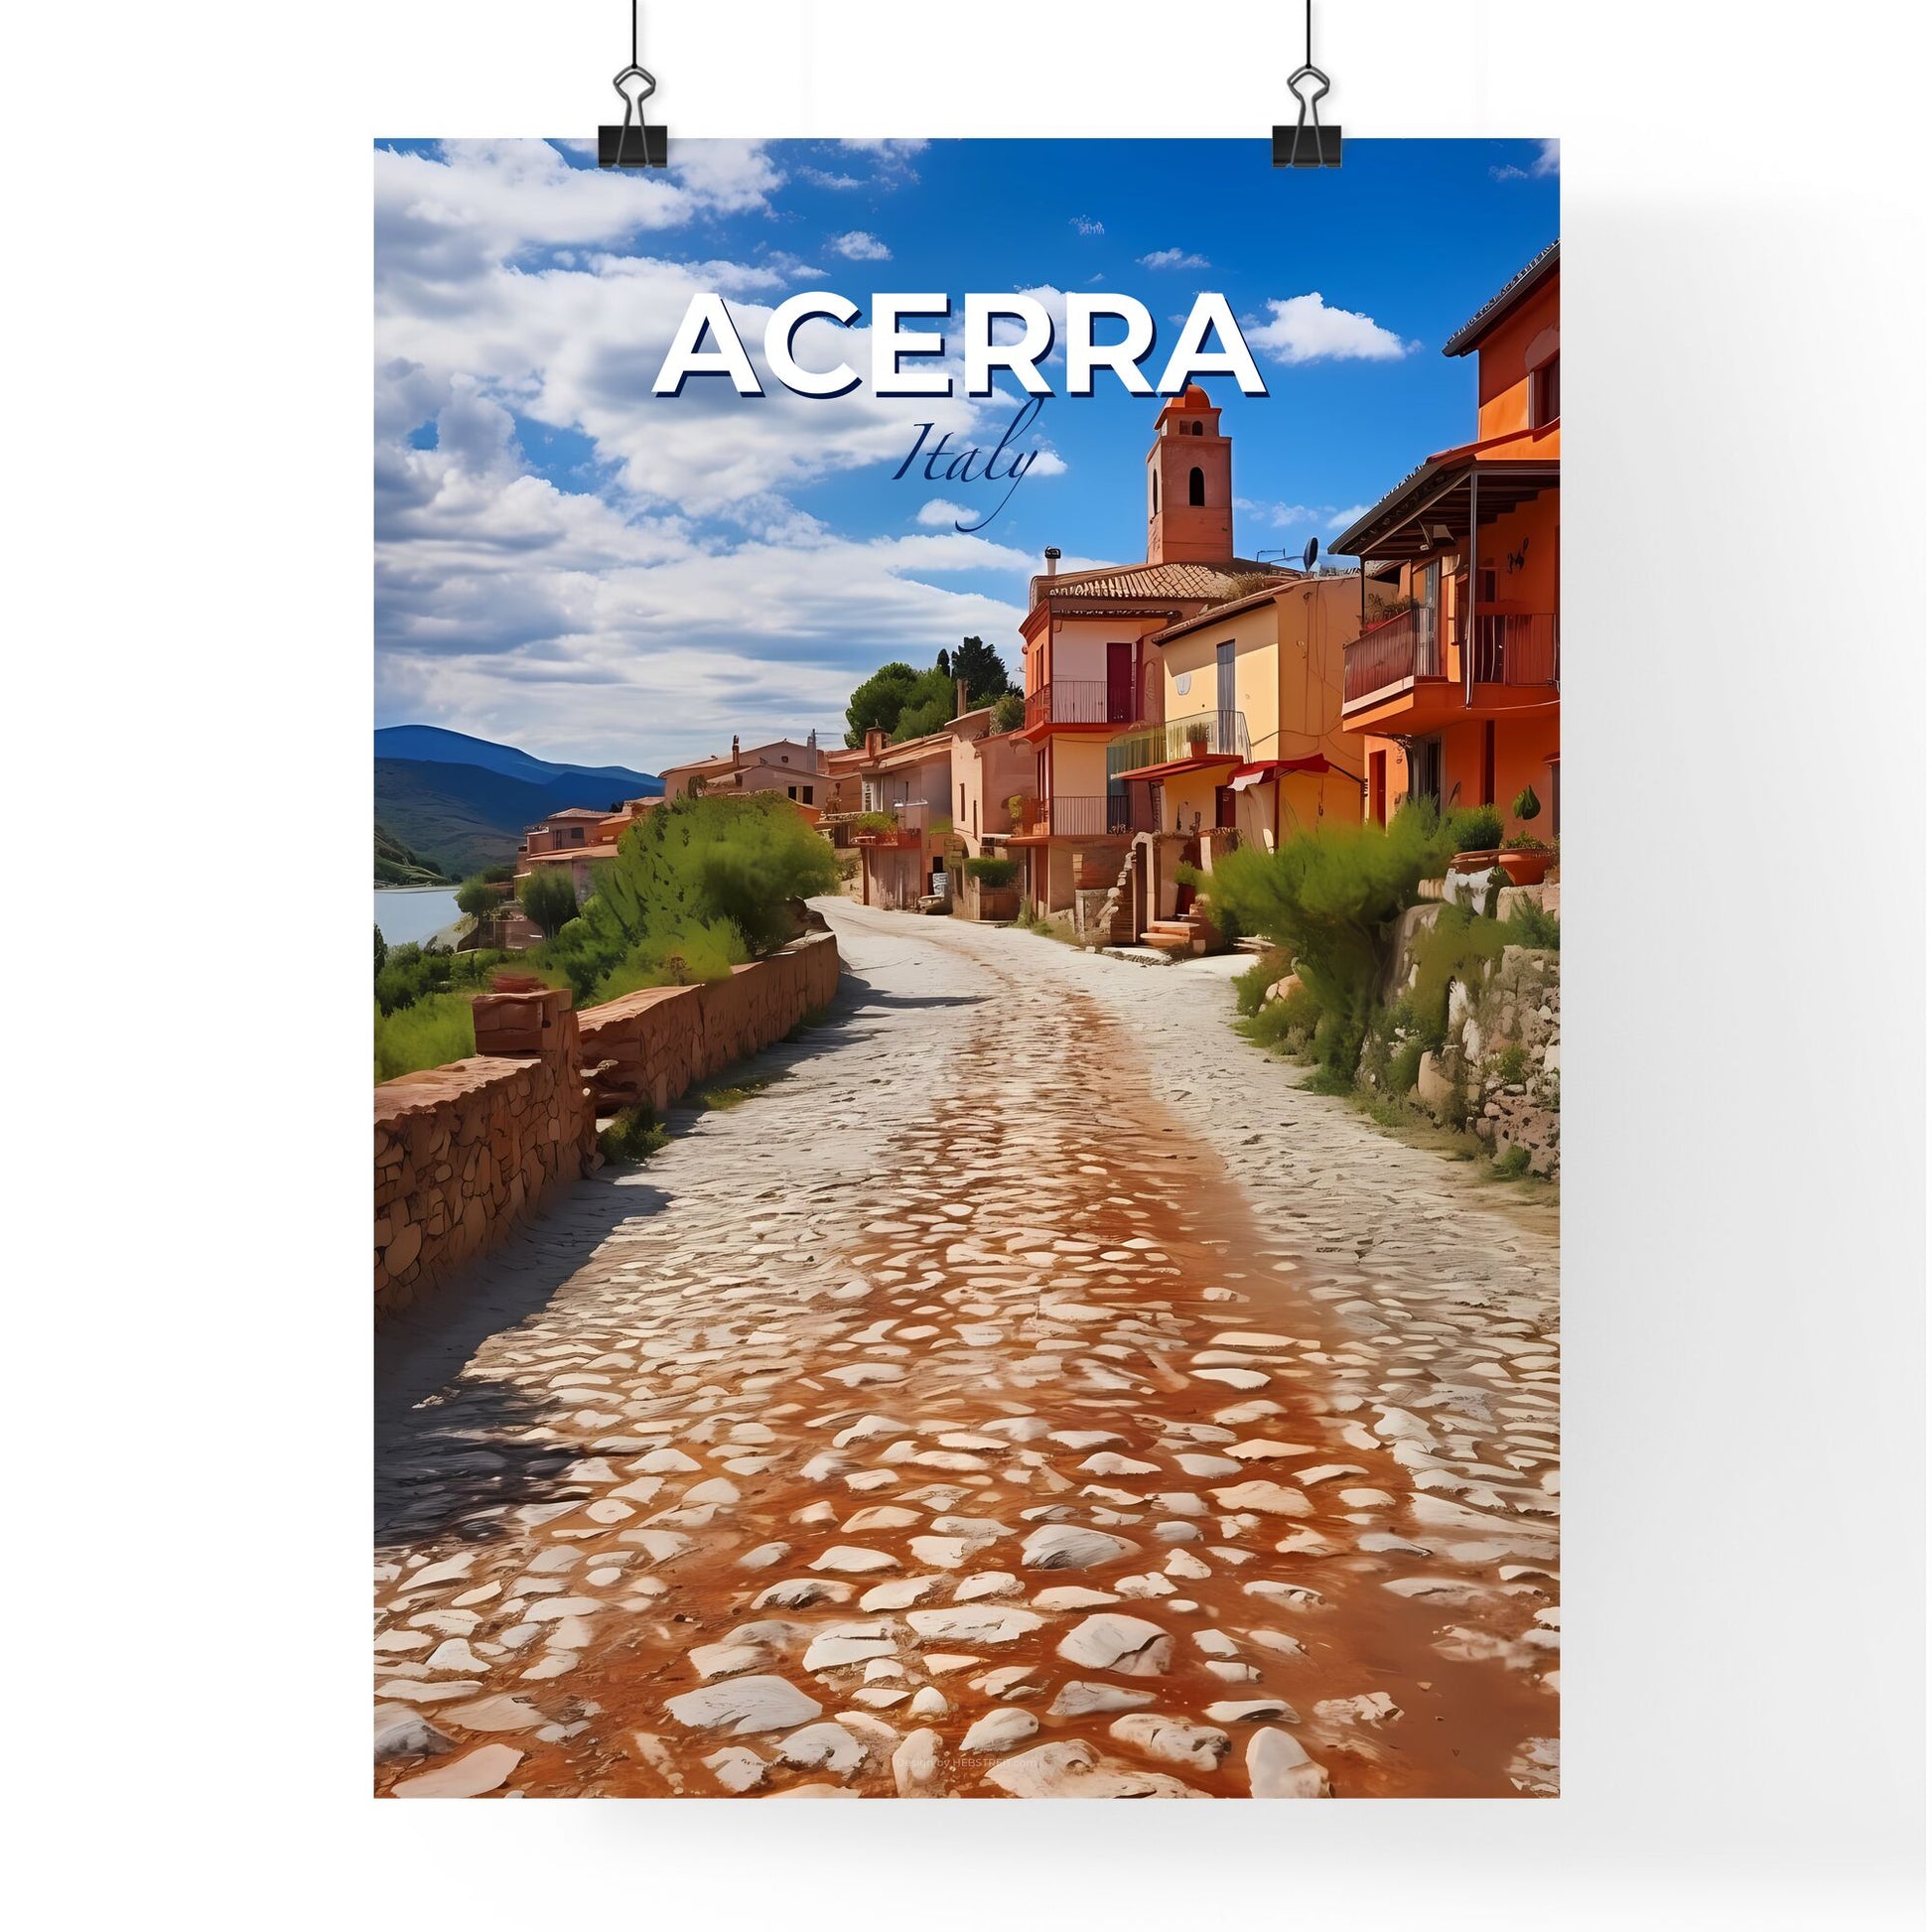 Acerra, Italy, A Poster of a stone road with buildings and trees Default Title